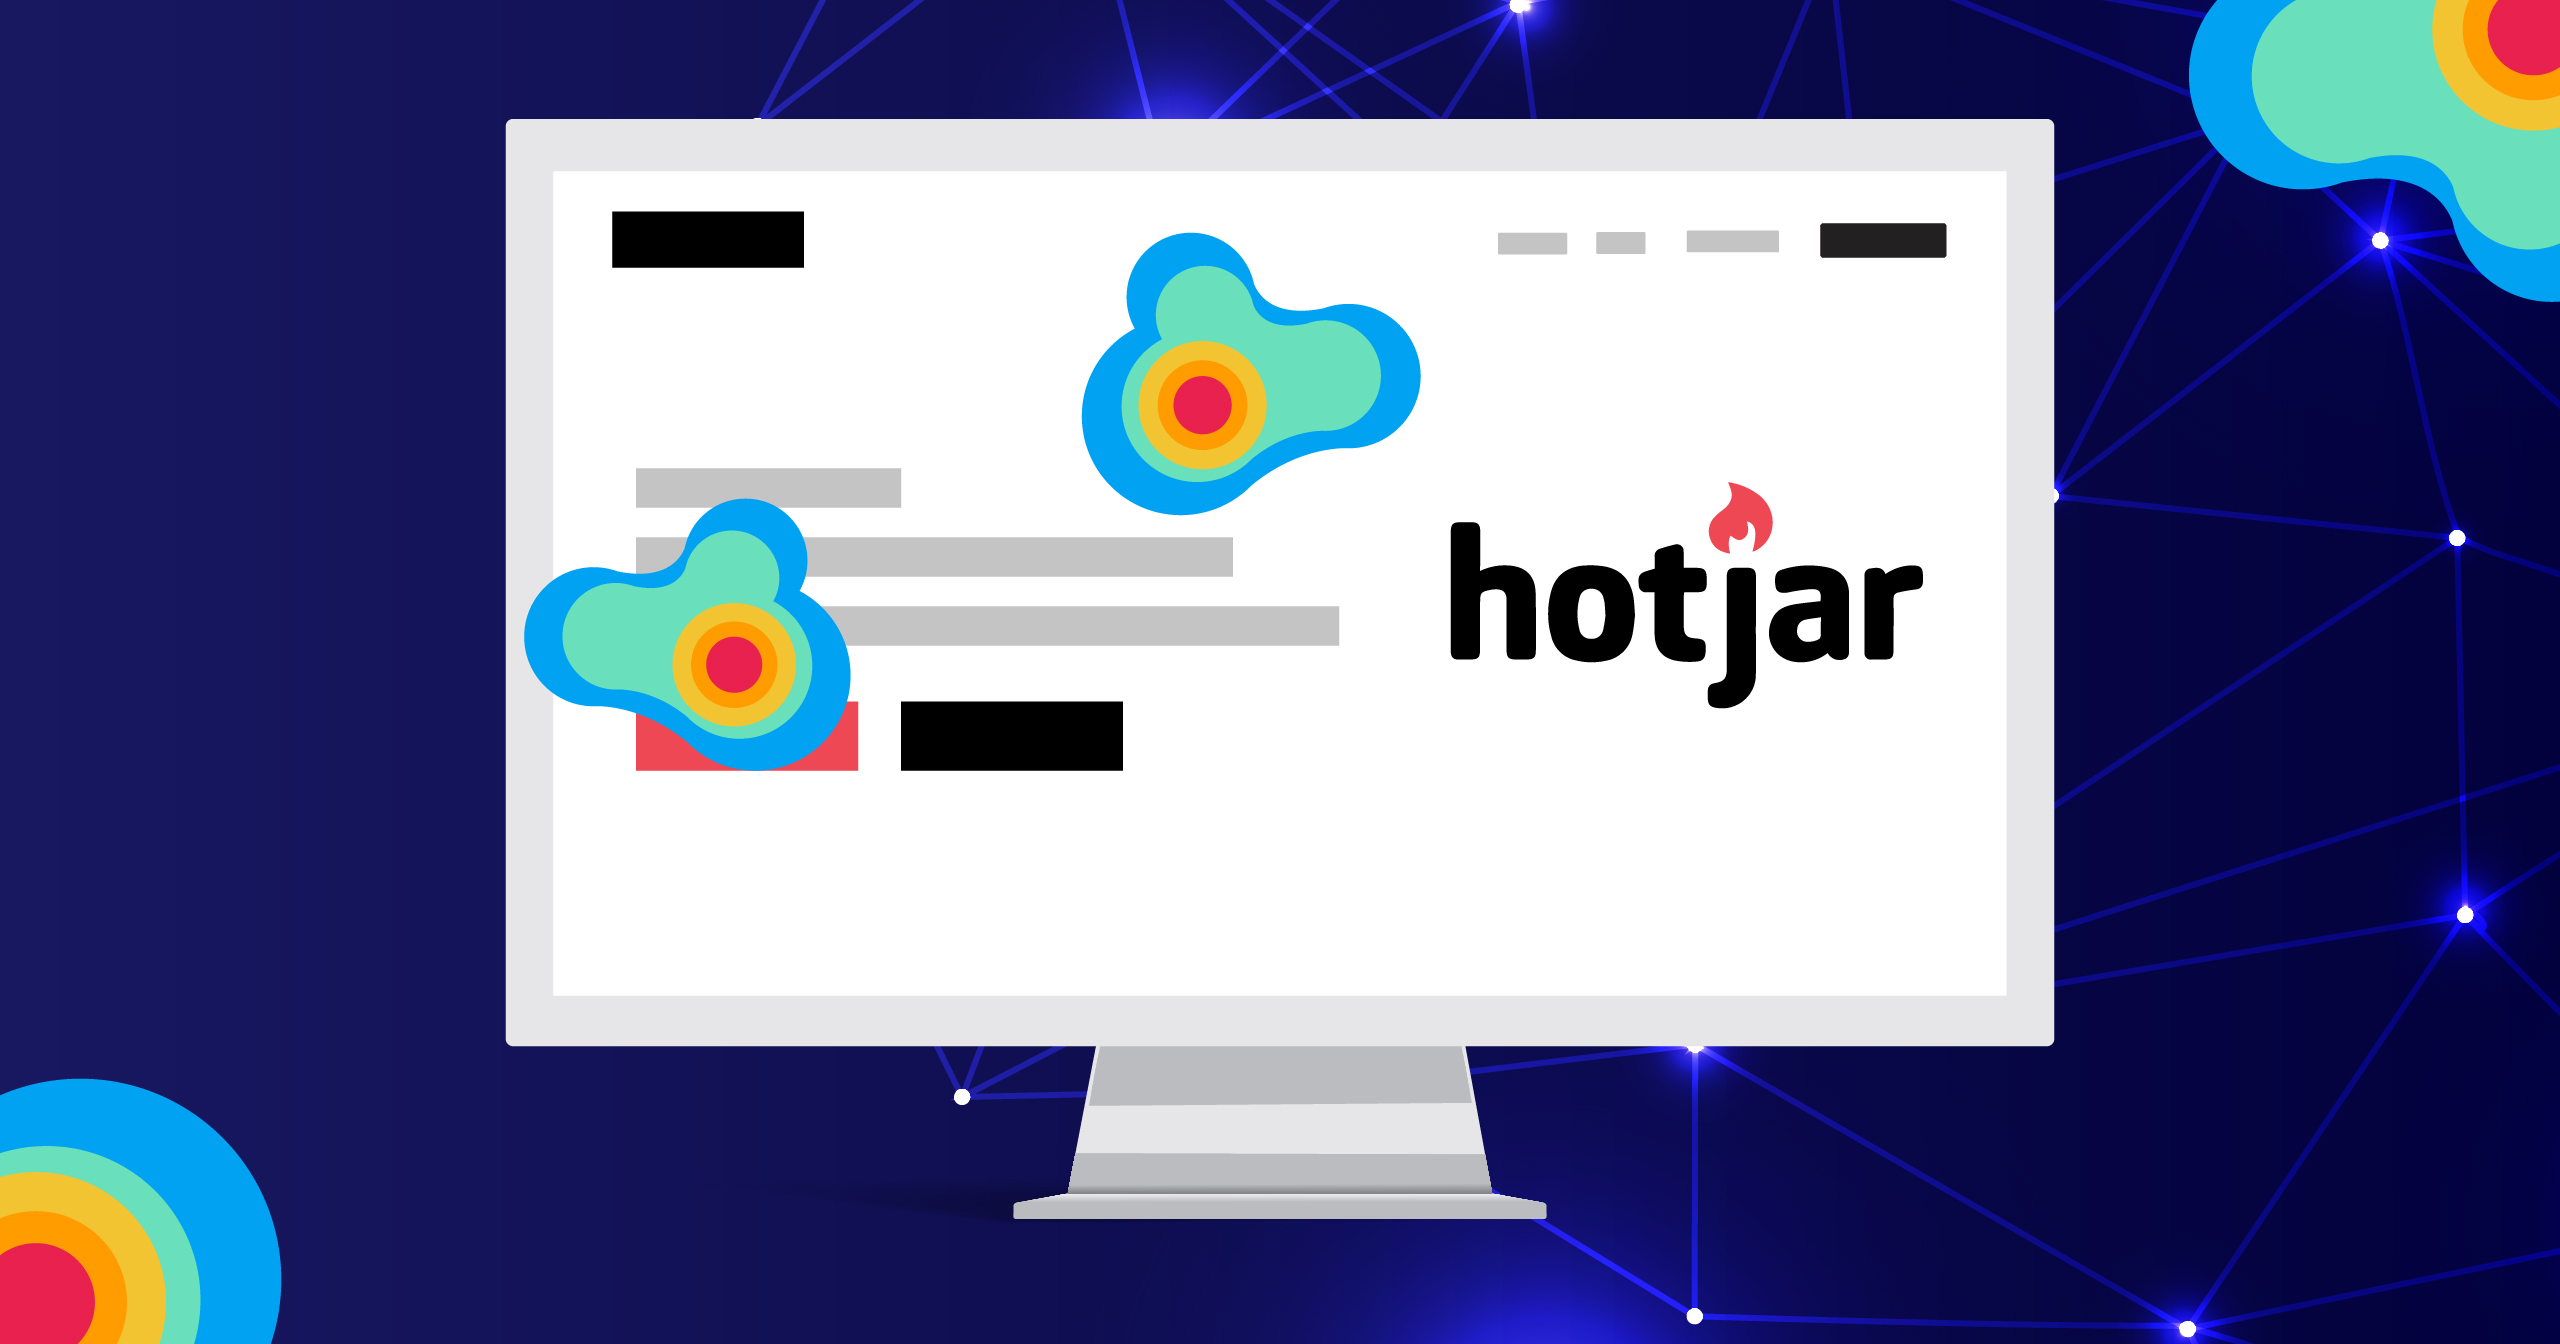 Hotjar: Complete Review, Top Alternatives, Key Stats, and More